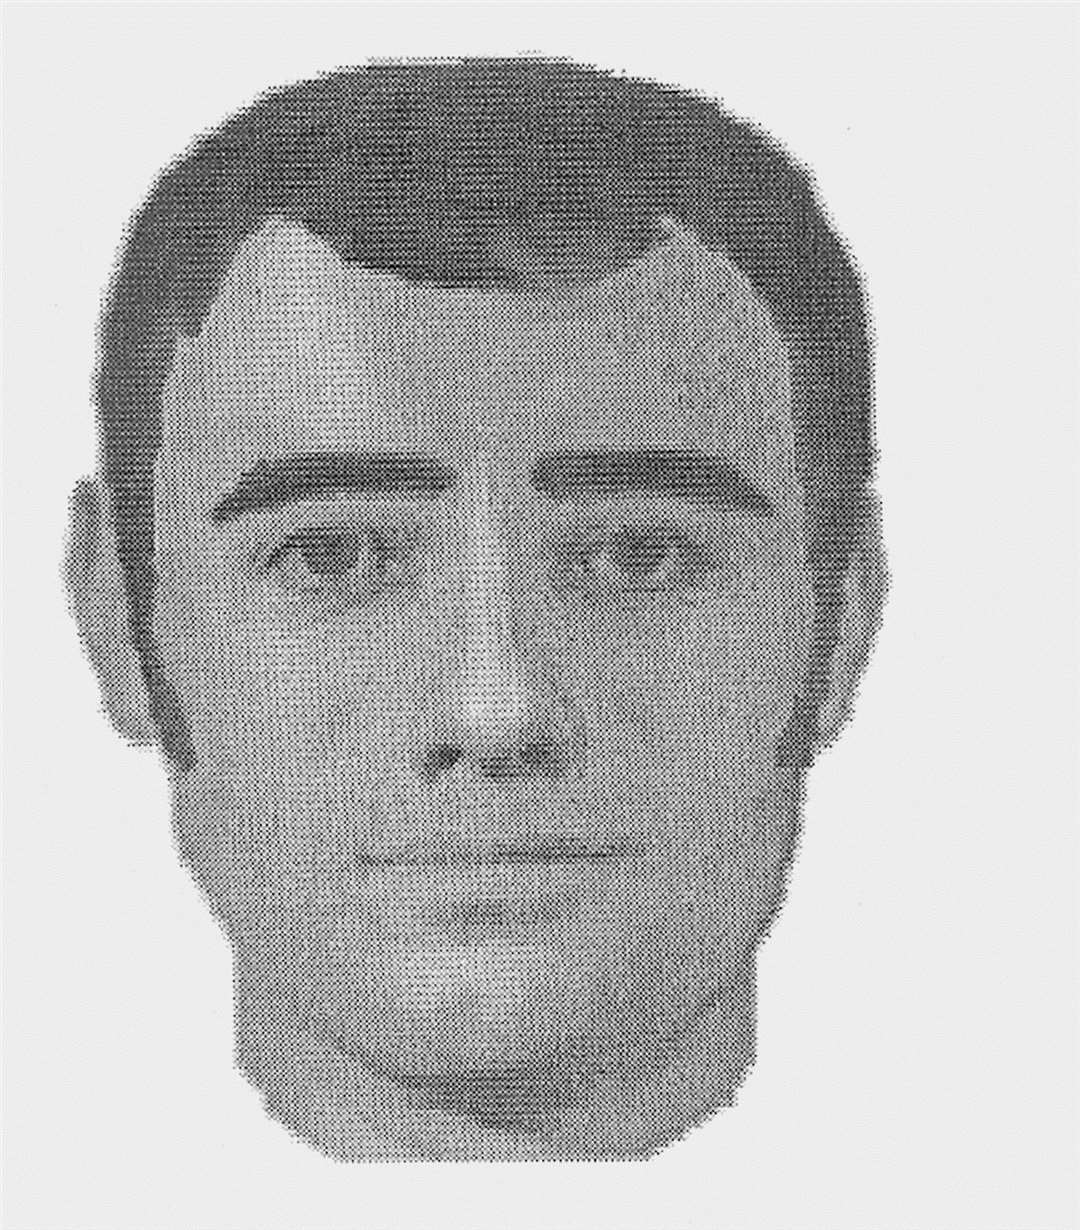 An early E-fit from 2001; before this, physical paper and sliders were used